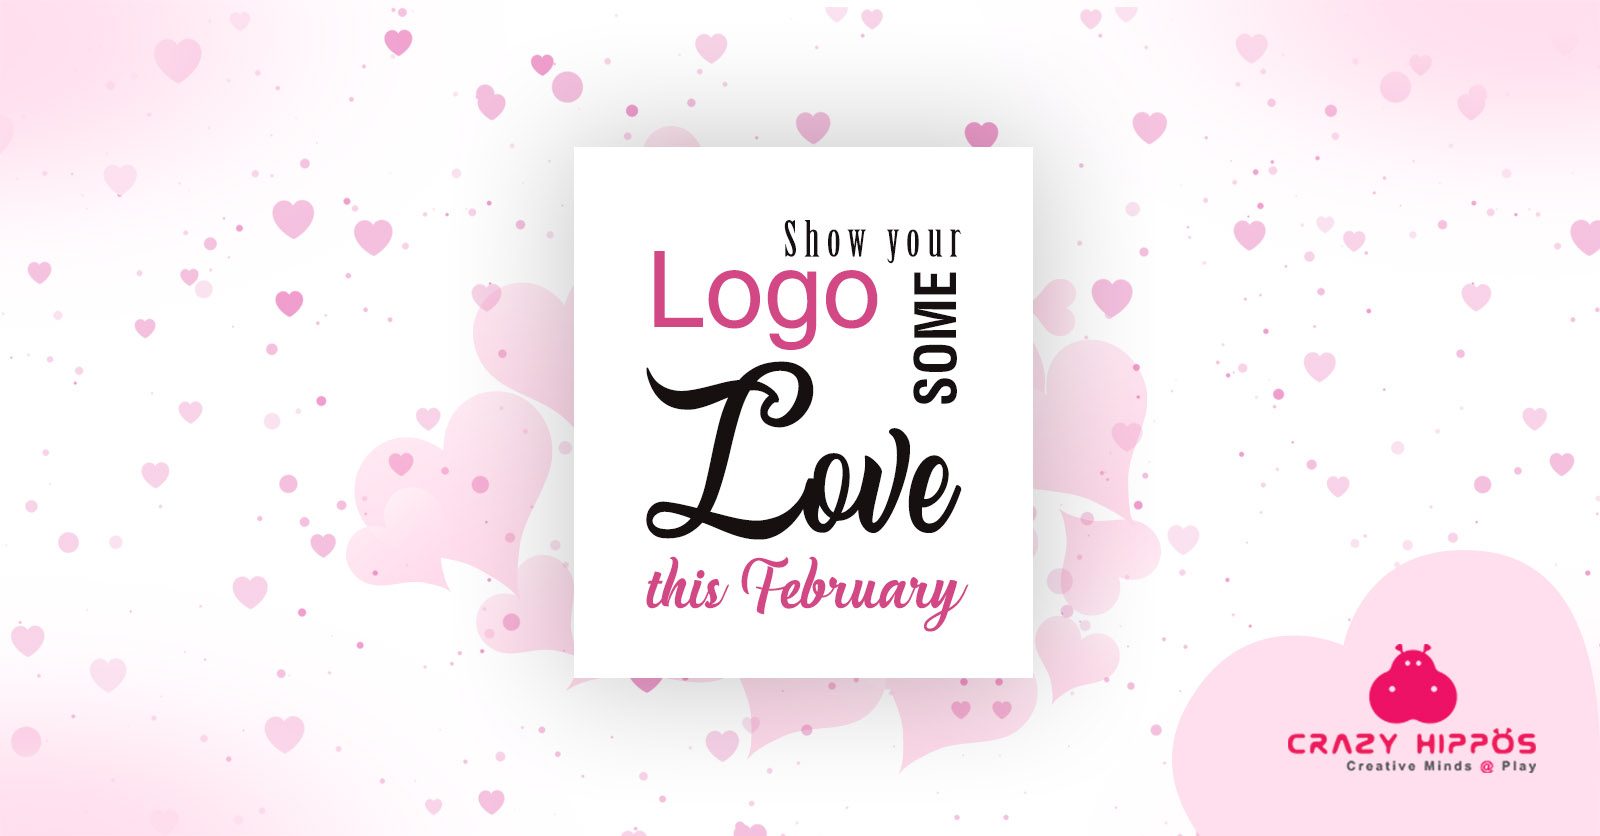 SHOW YOUR LOGO SOME LOVE THIS FEBRUARY